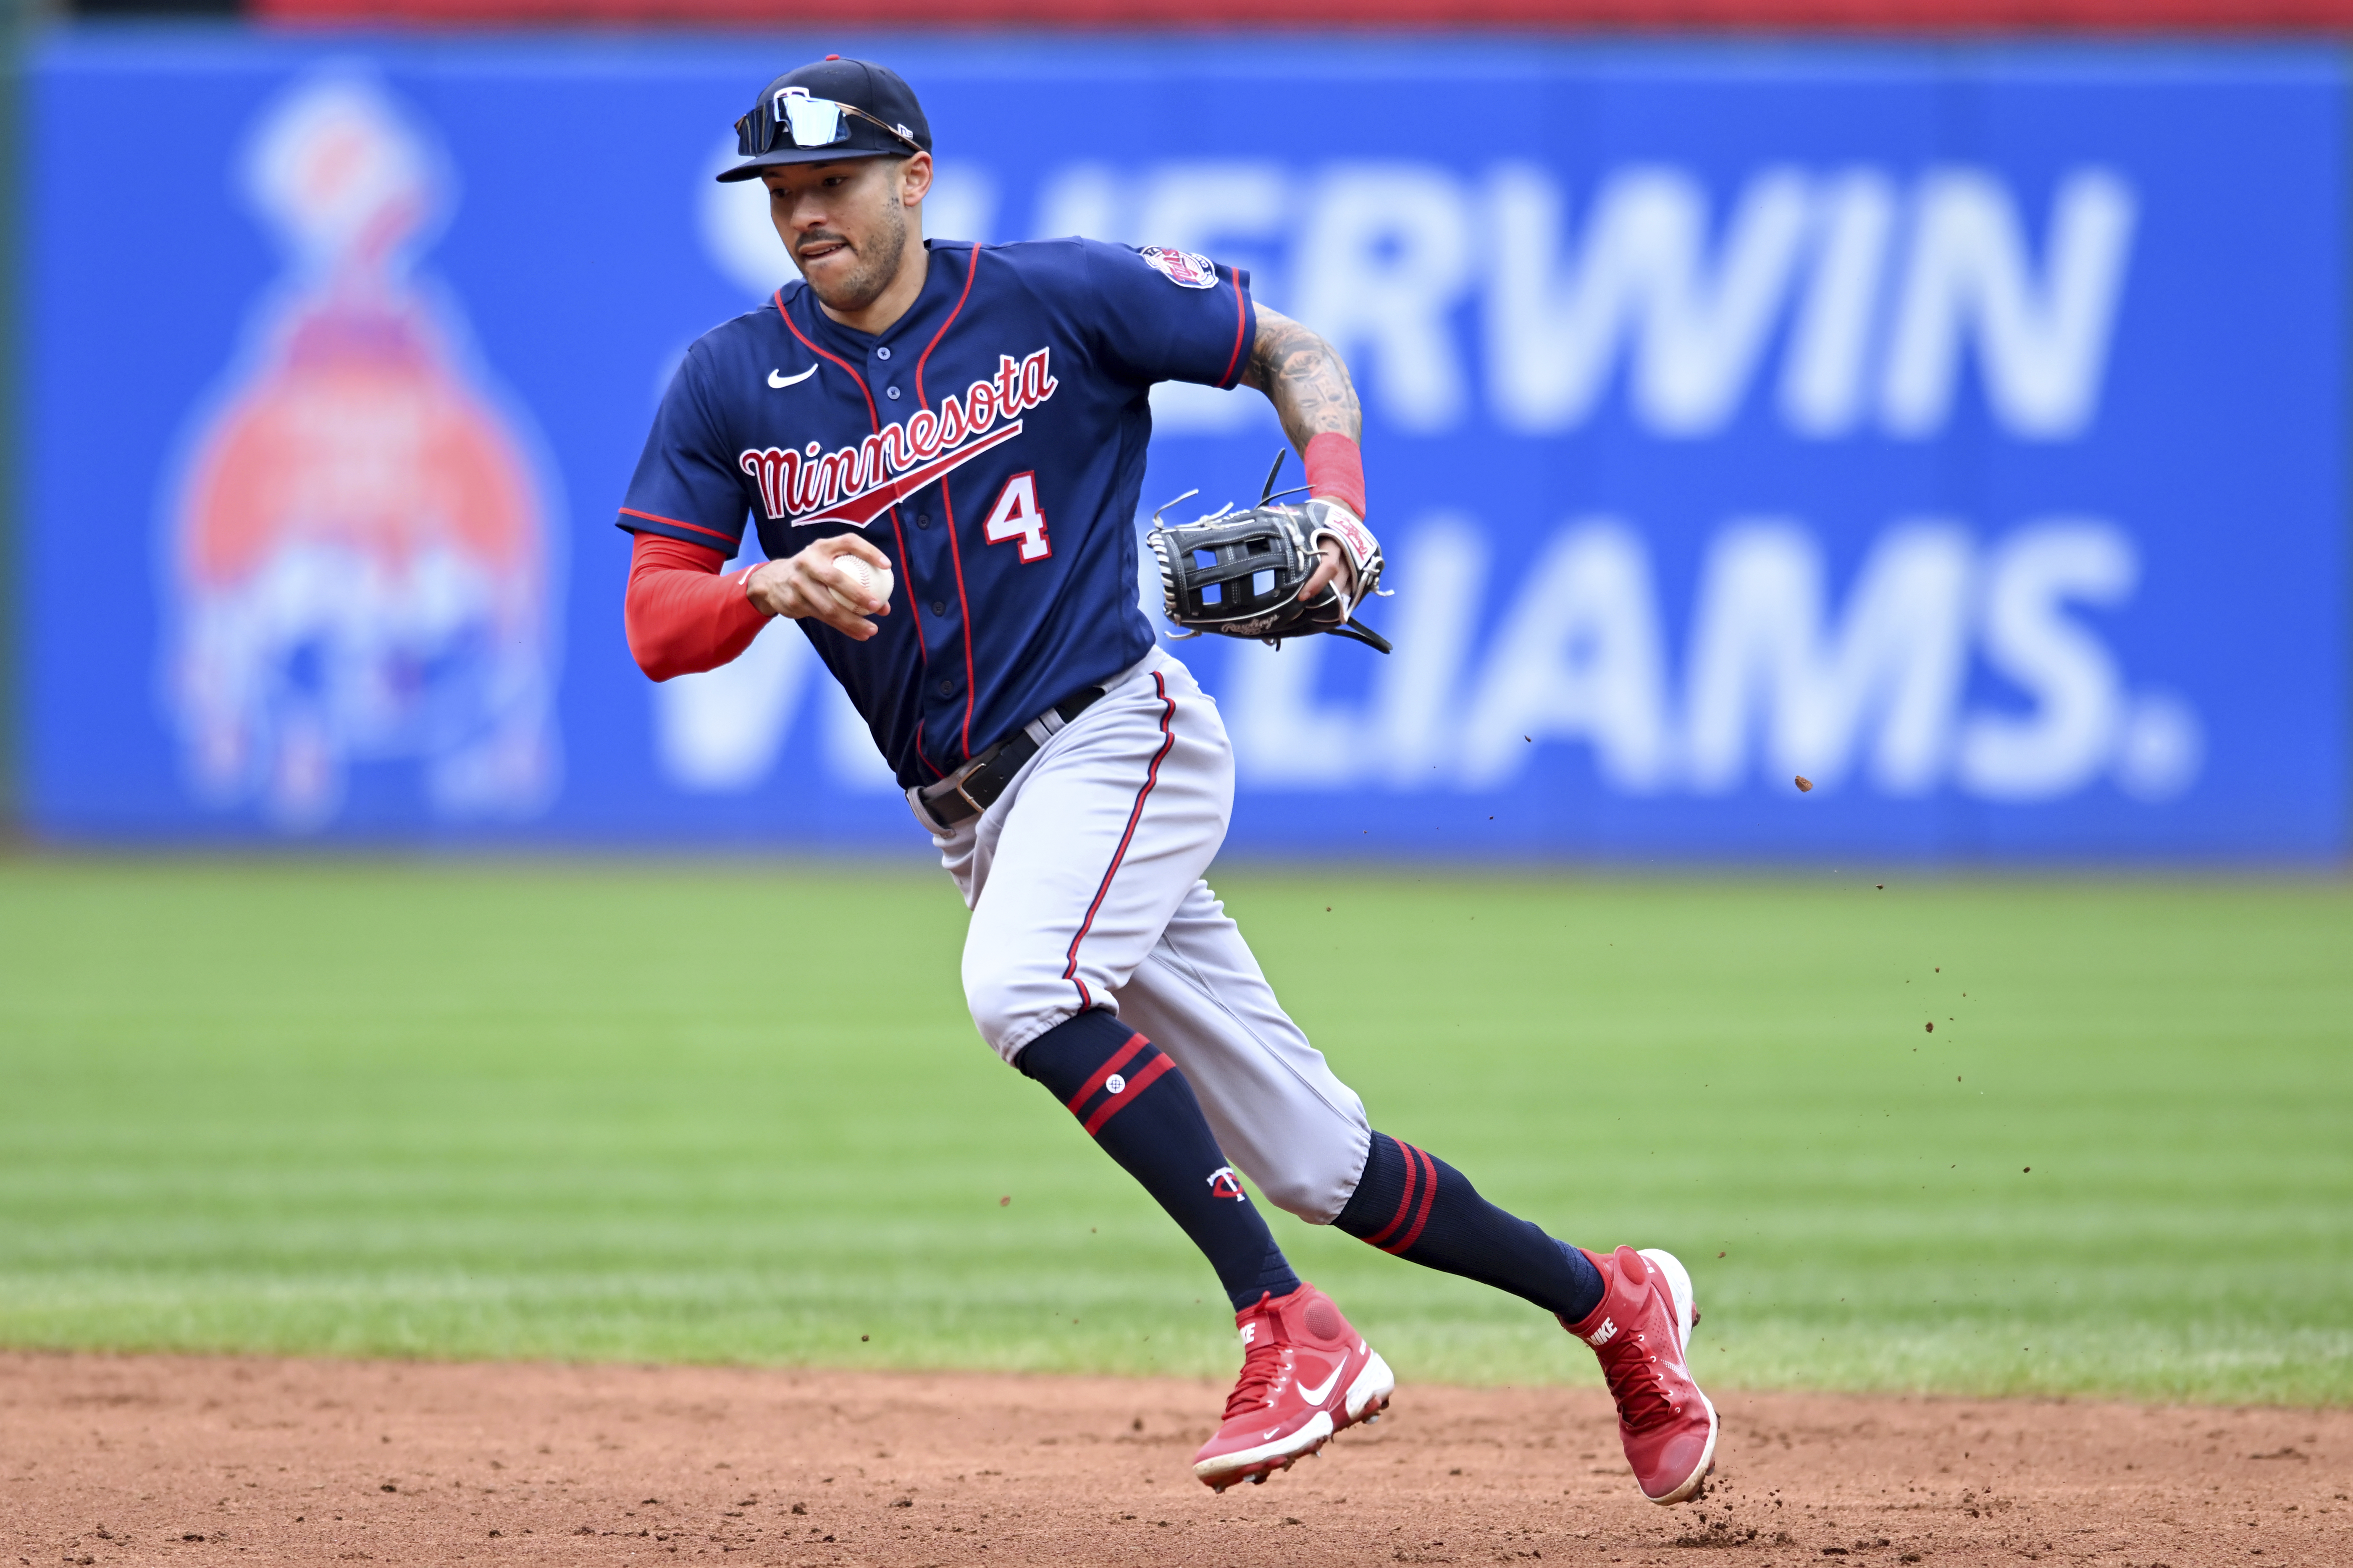 Carlos Correa comes to terms with Twins, leaving the Mets behind